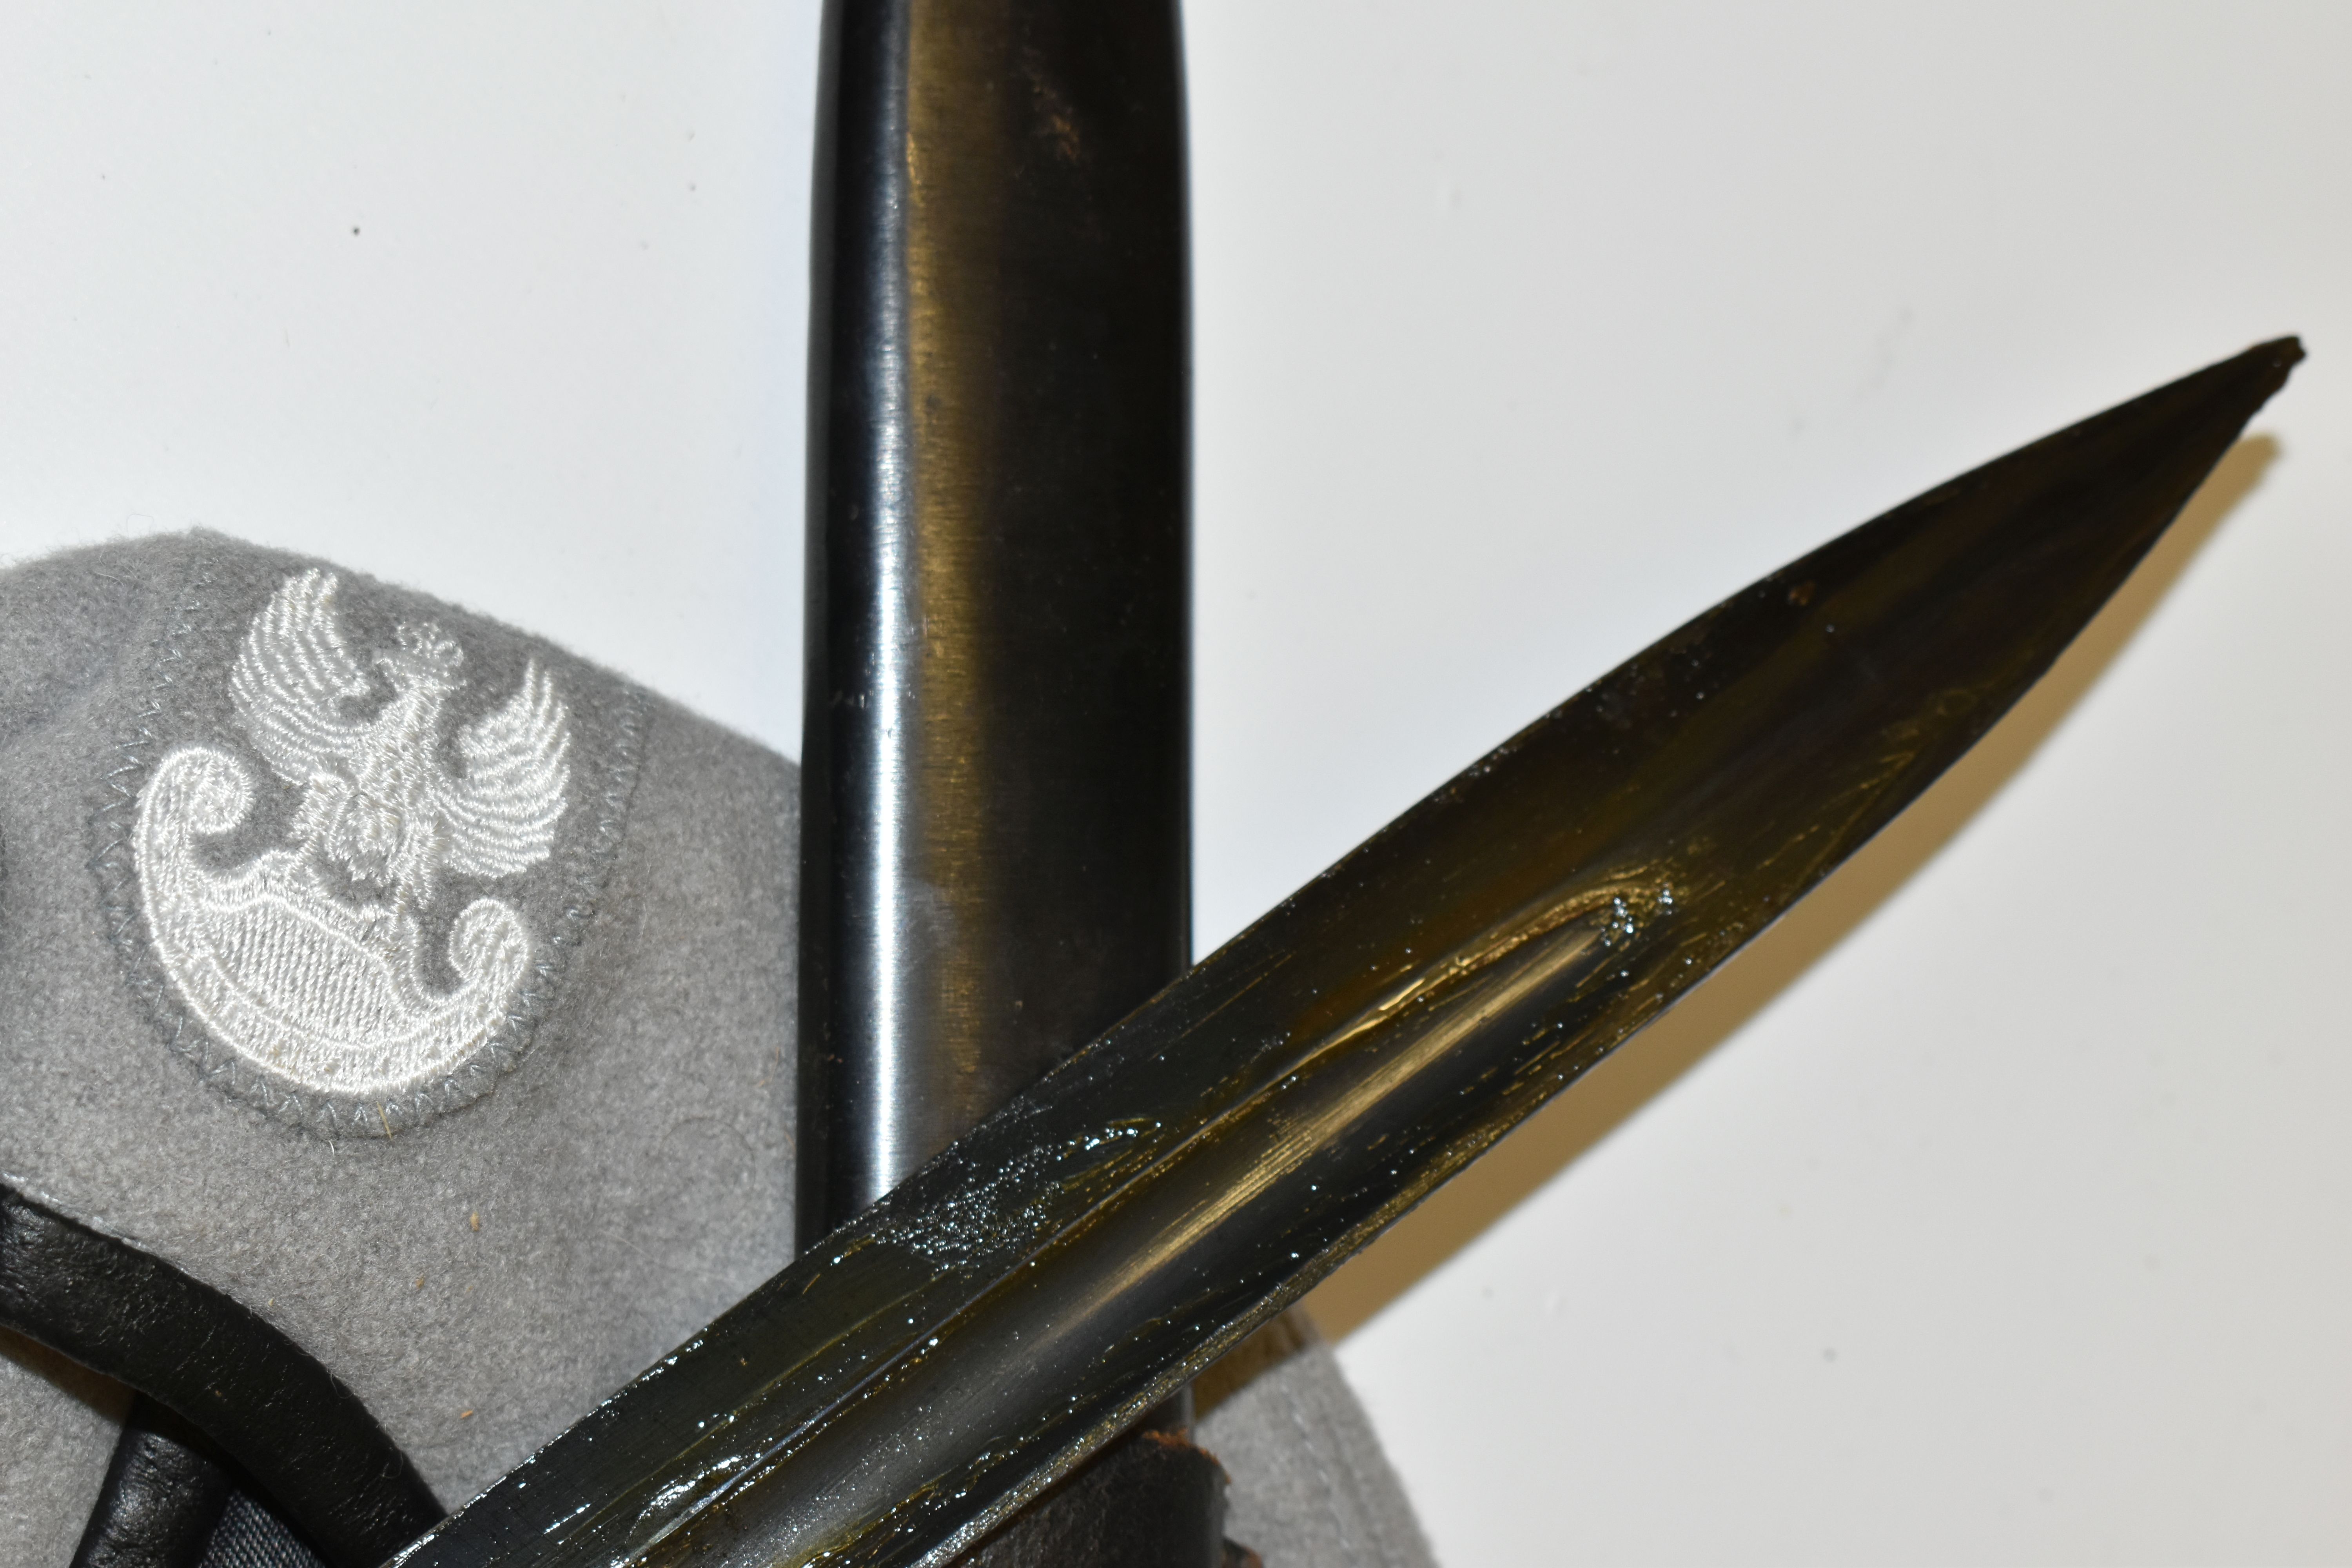 A WWII MAUSER BAYONET, A POLISH SPECIAL FORCES GREY BERET (POSSIBLY PARACHUTE BRIGADE) AND A - Image 4 of 8